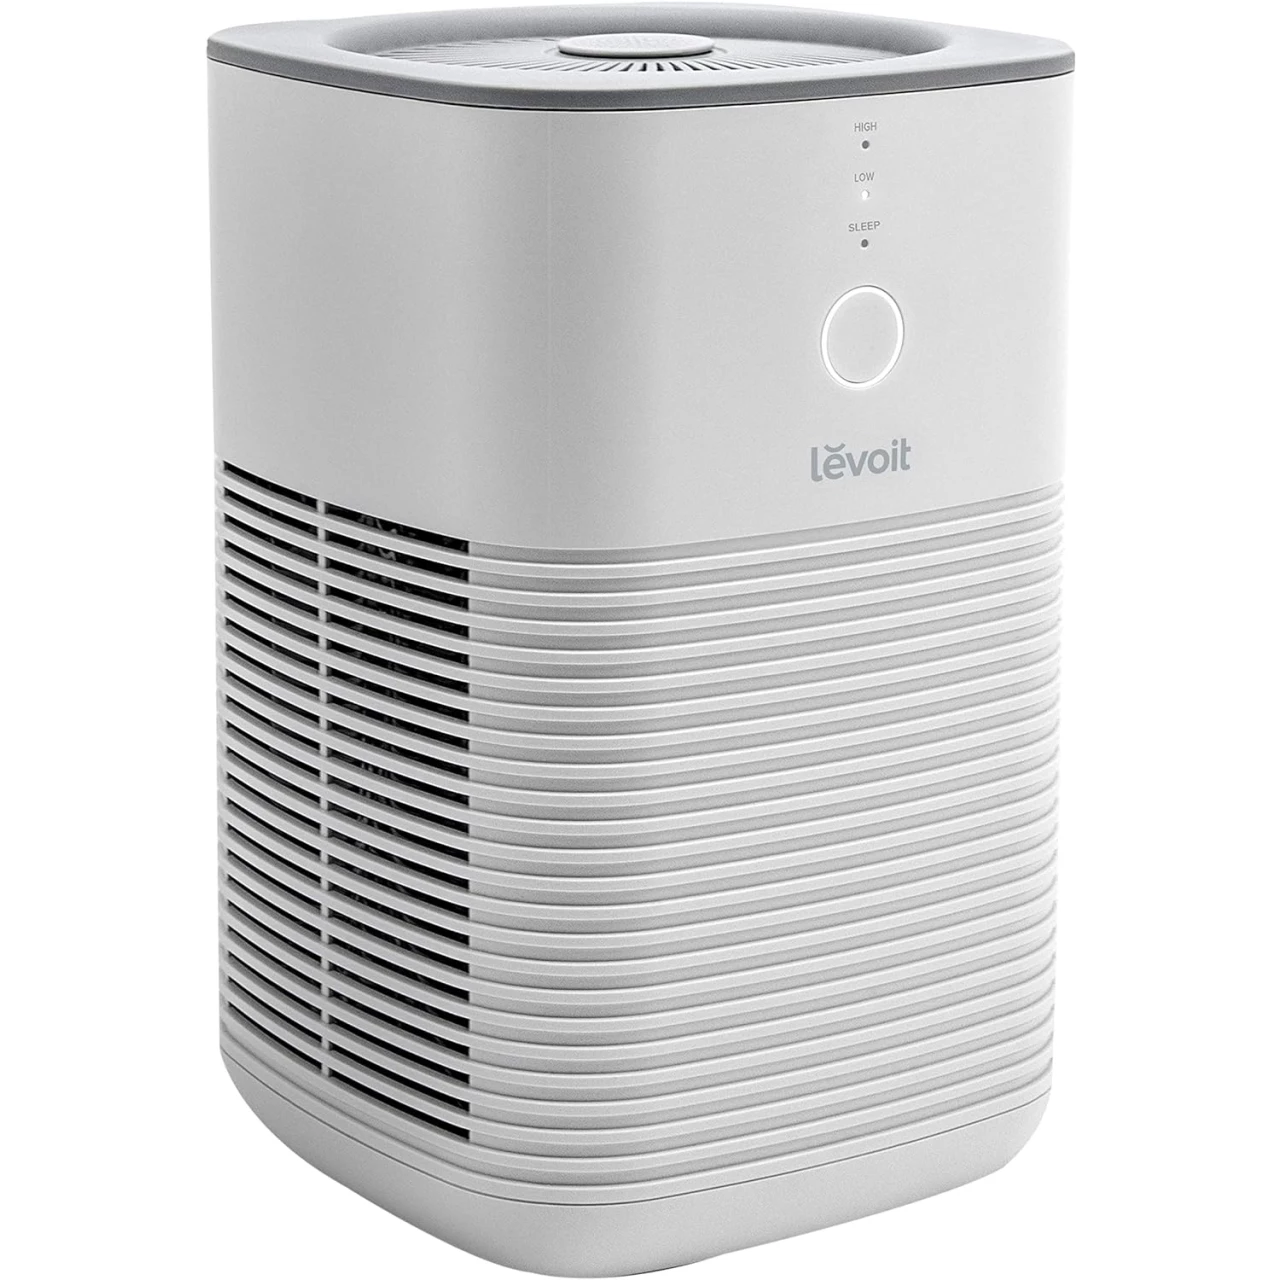 LEVOIT Air Purifier for Home Bedroom, HEPA Fresheners Filter Small Room Cleaner